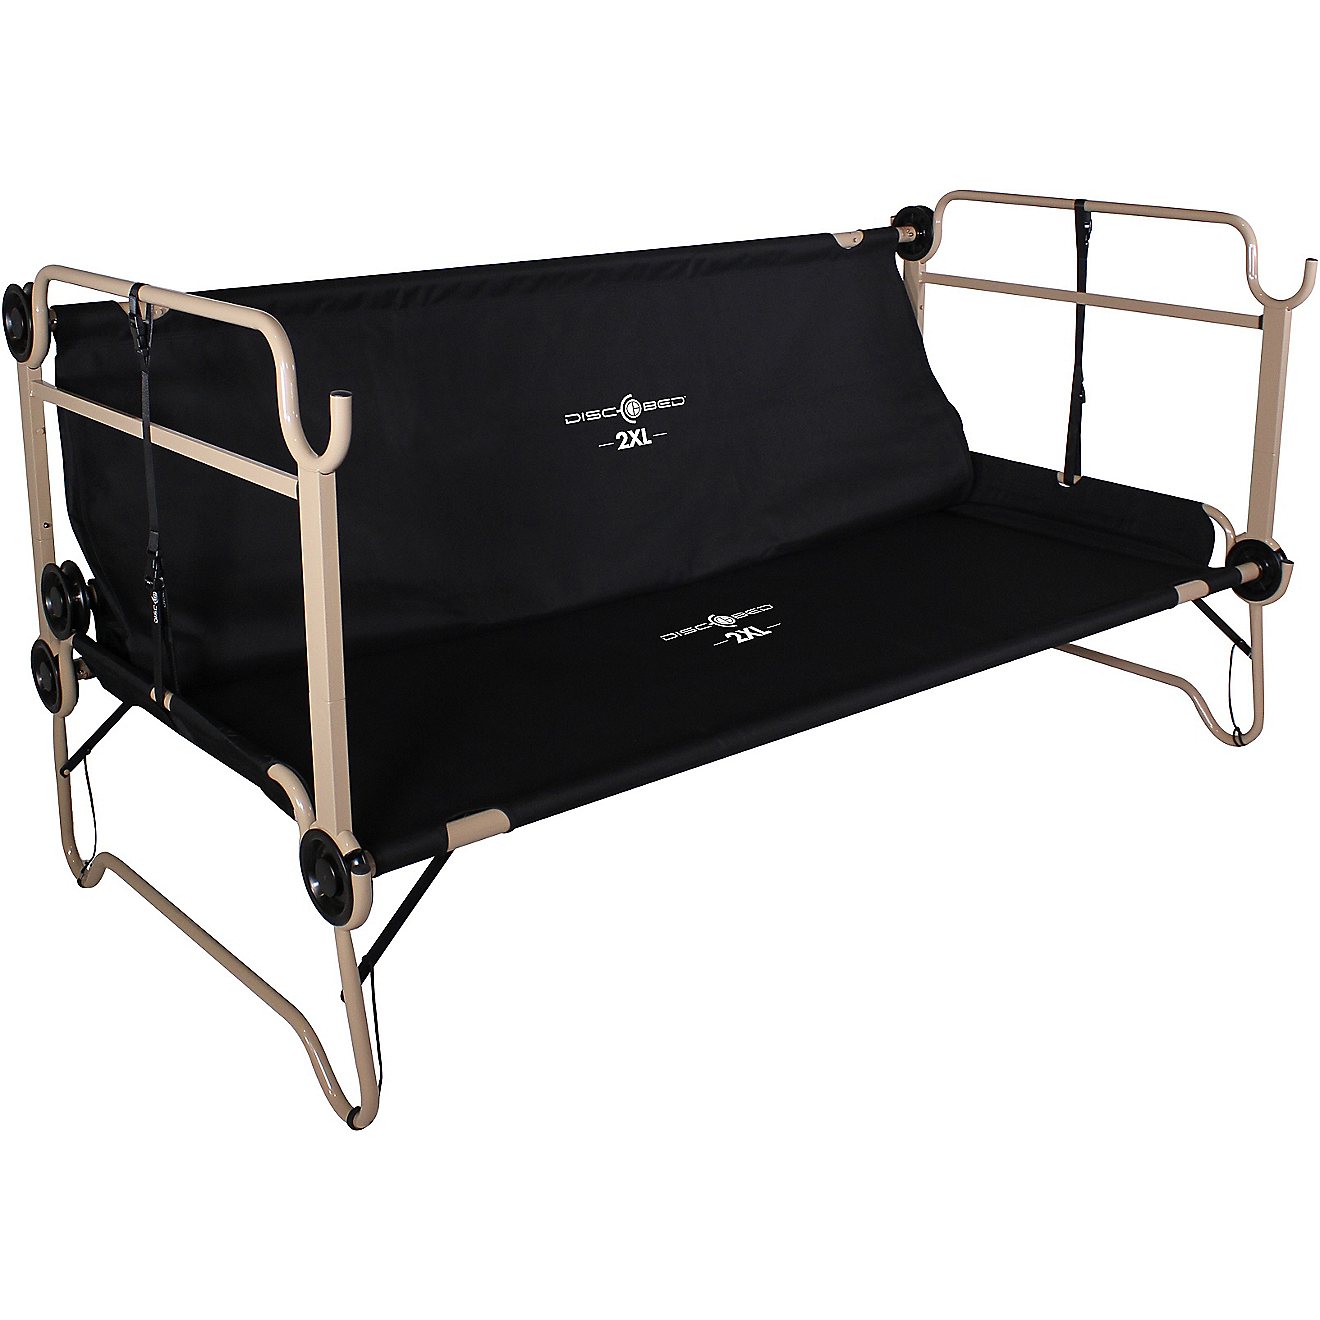 Disc-O-Bed 2XL with Organizers Cot System                                                                                        - view number 2